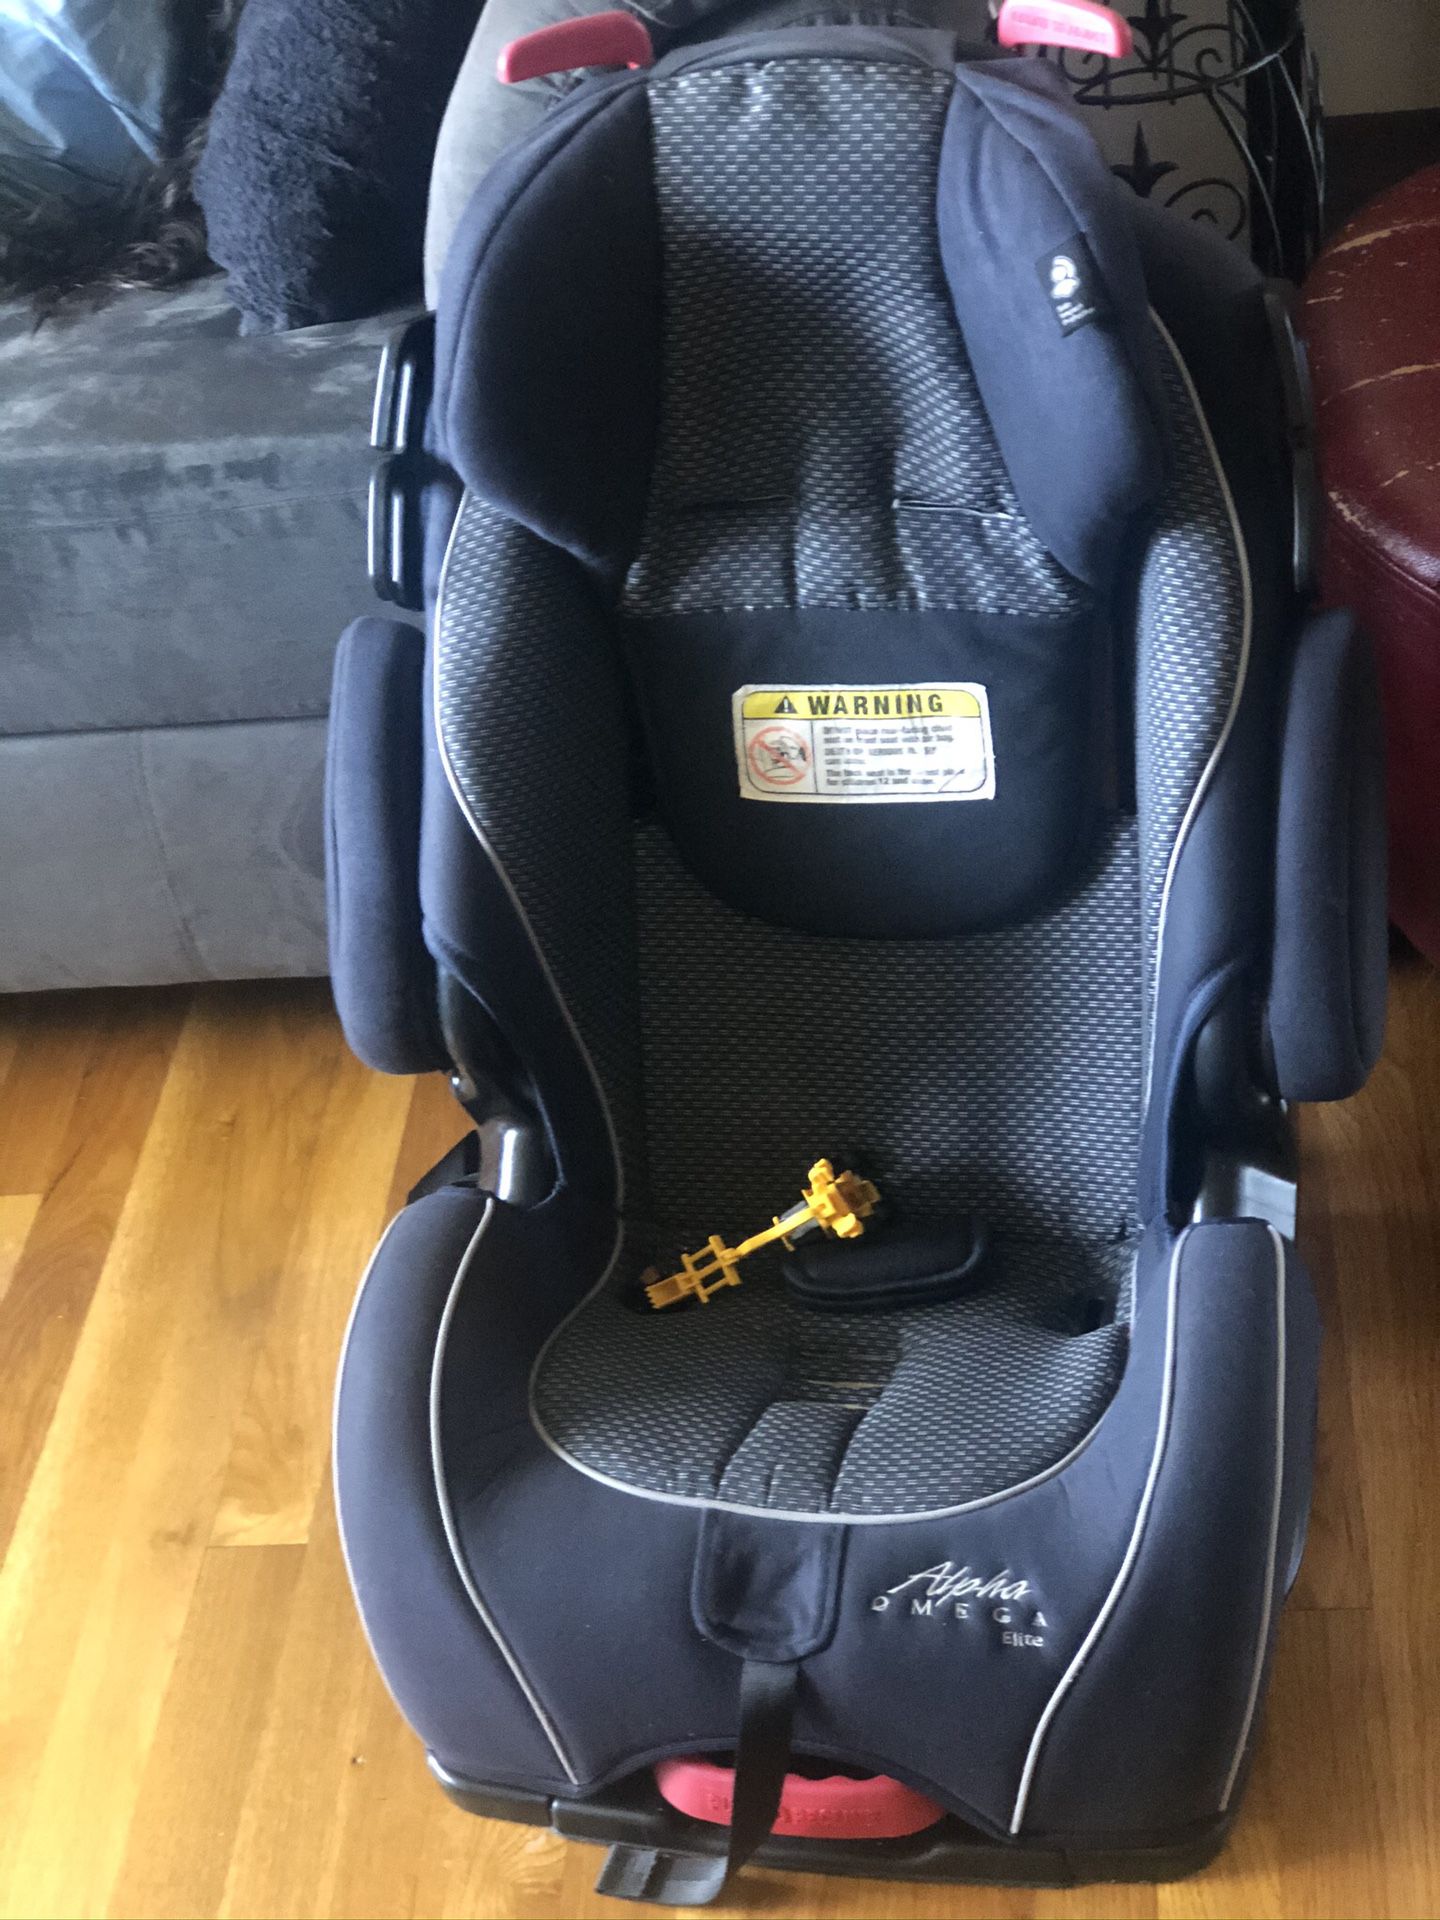 Car seat. Bought 1 year ago. Good condition.